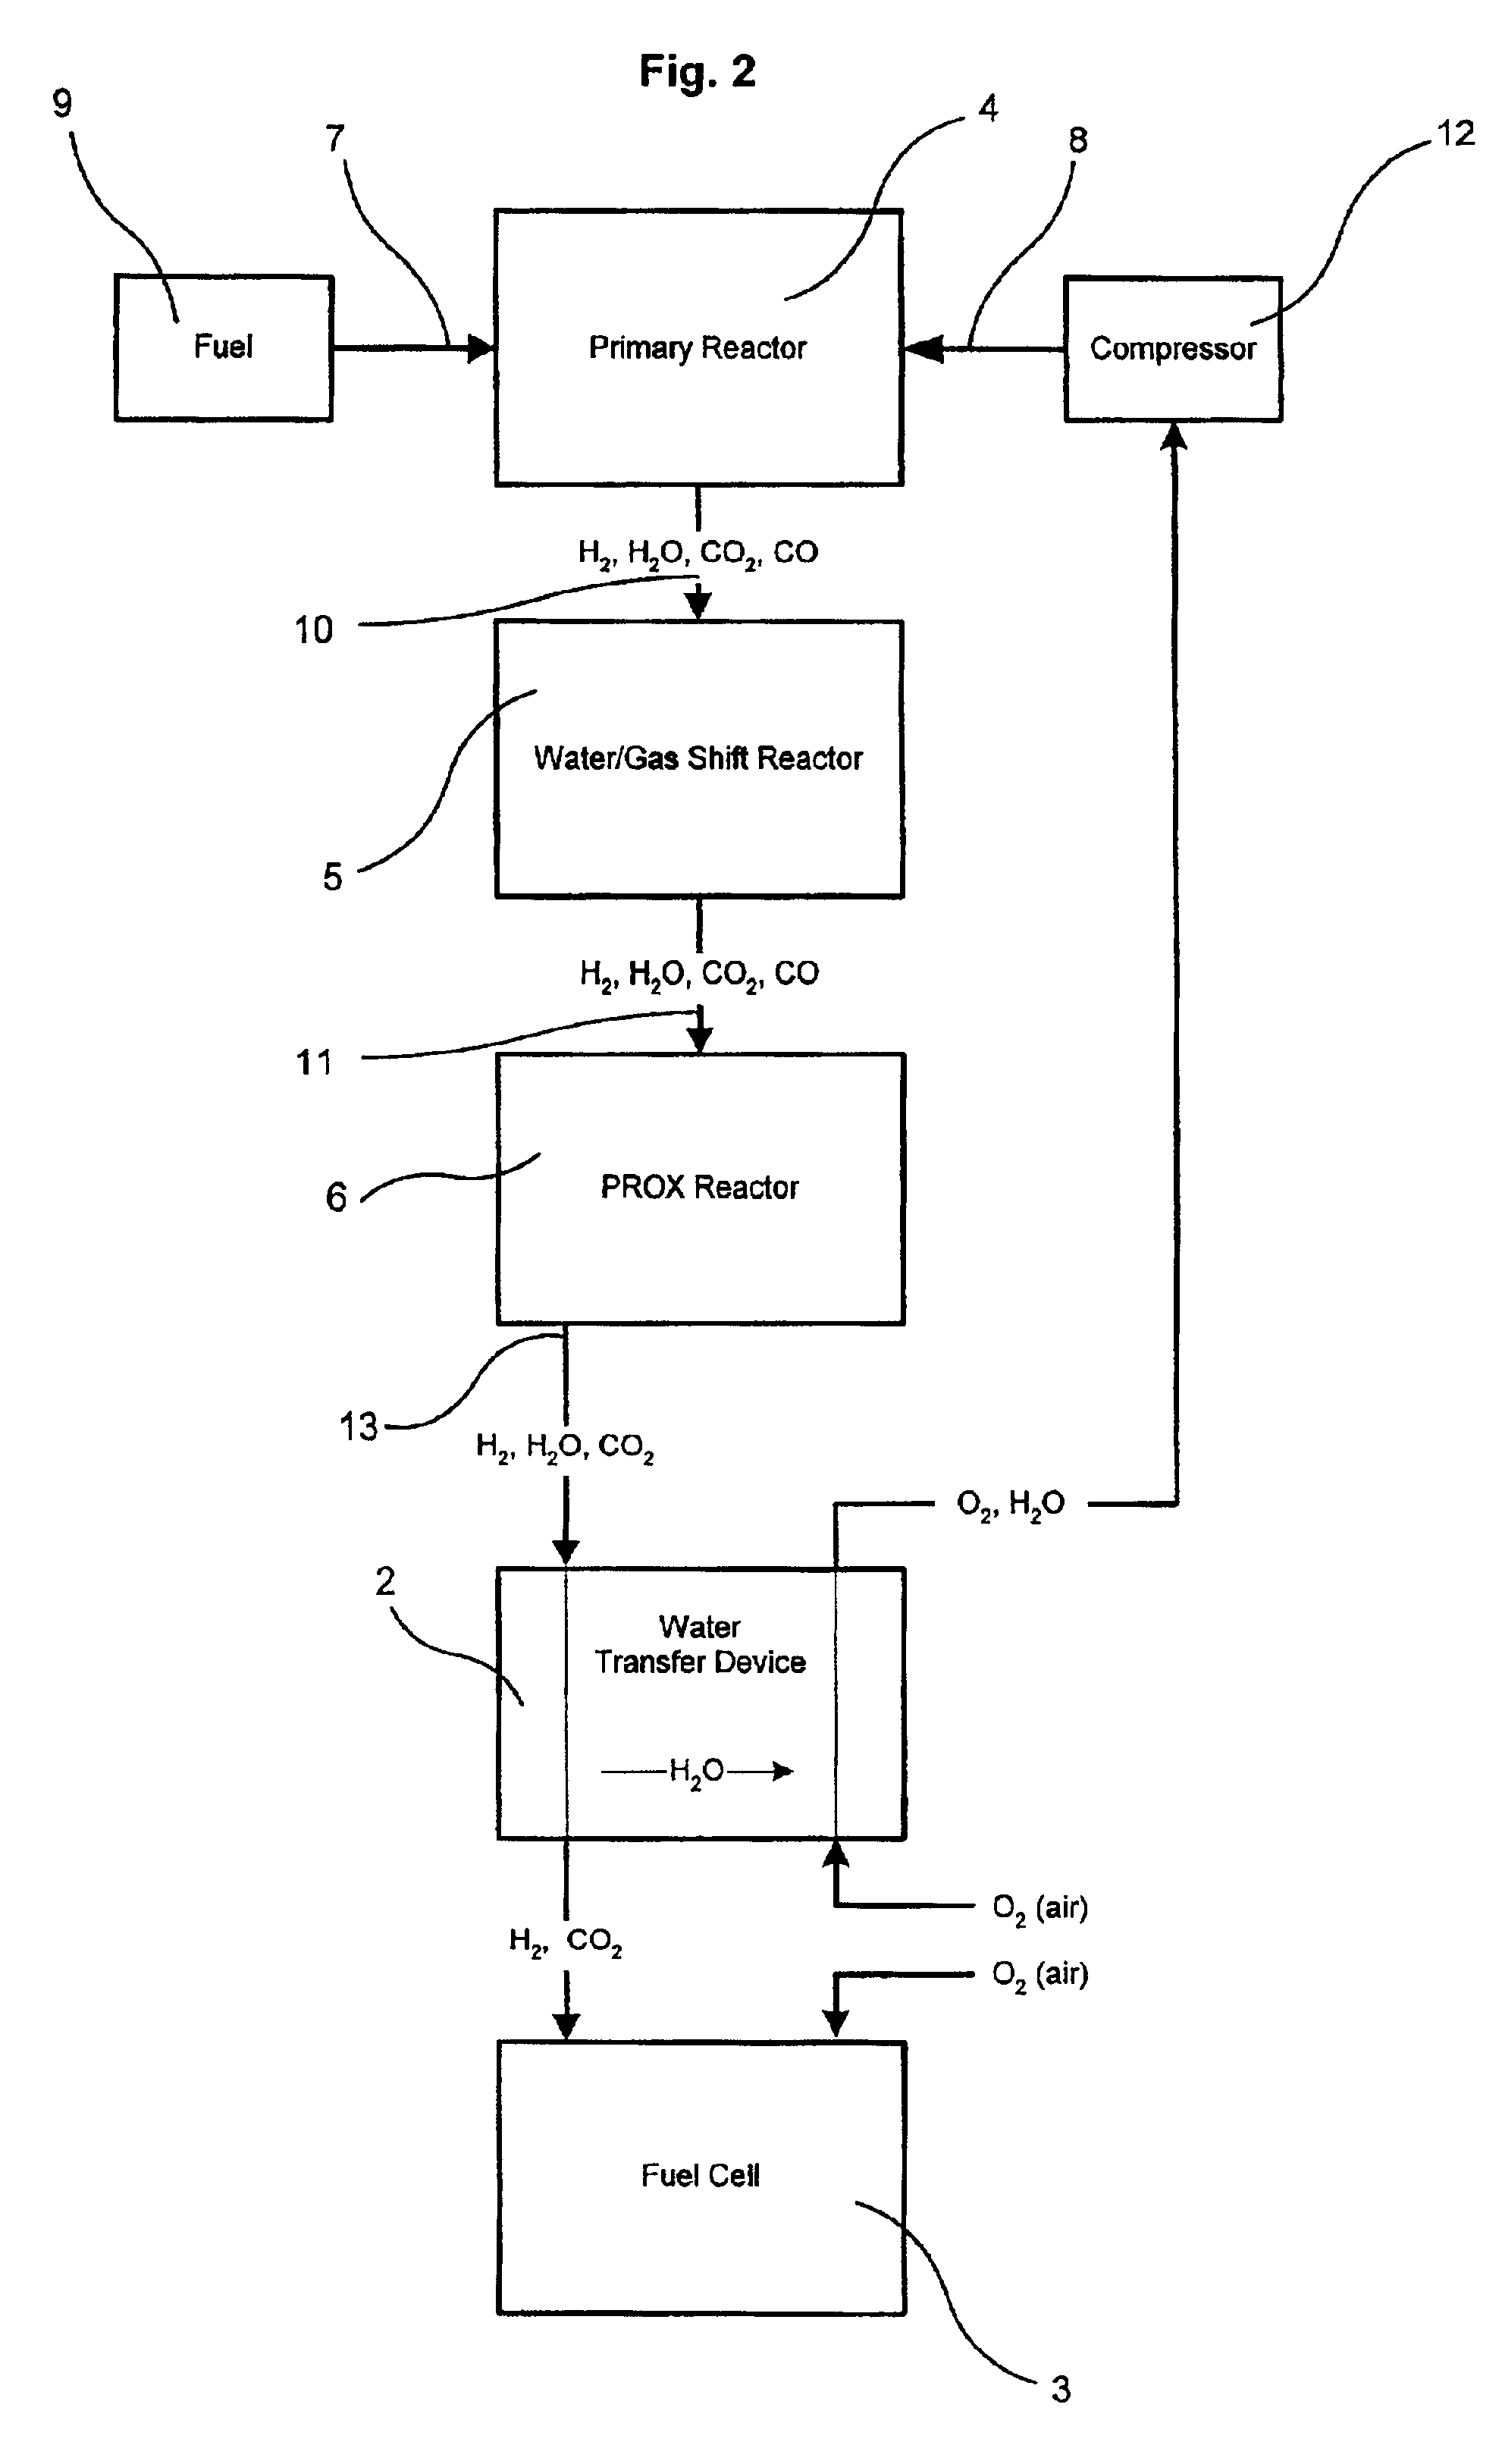 Water vapor transfer device for fuel cell reformer